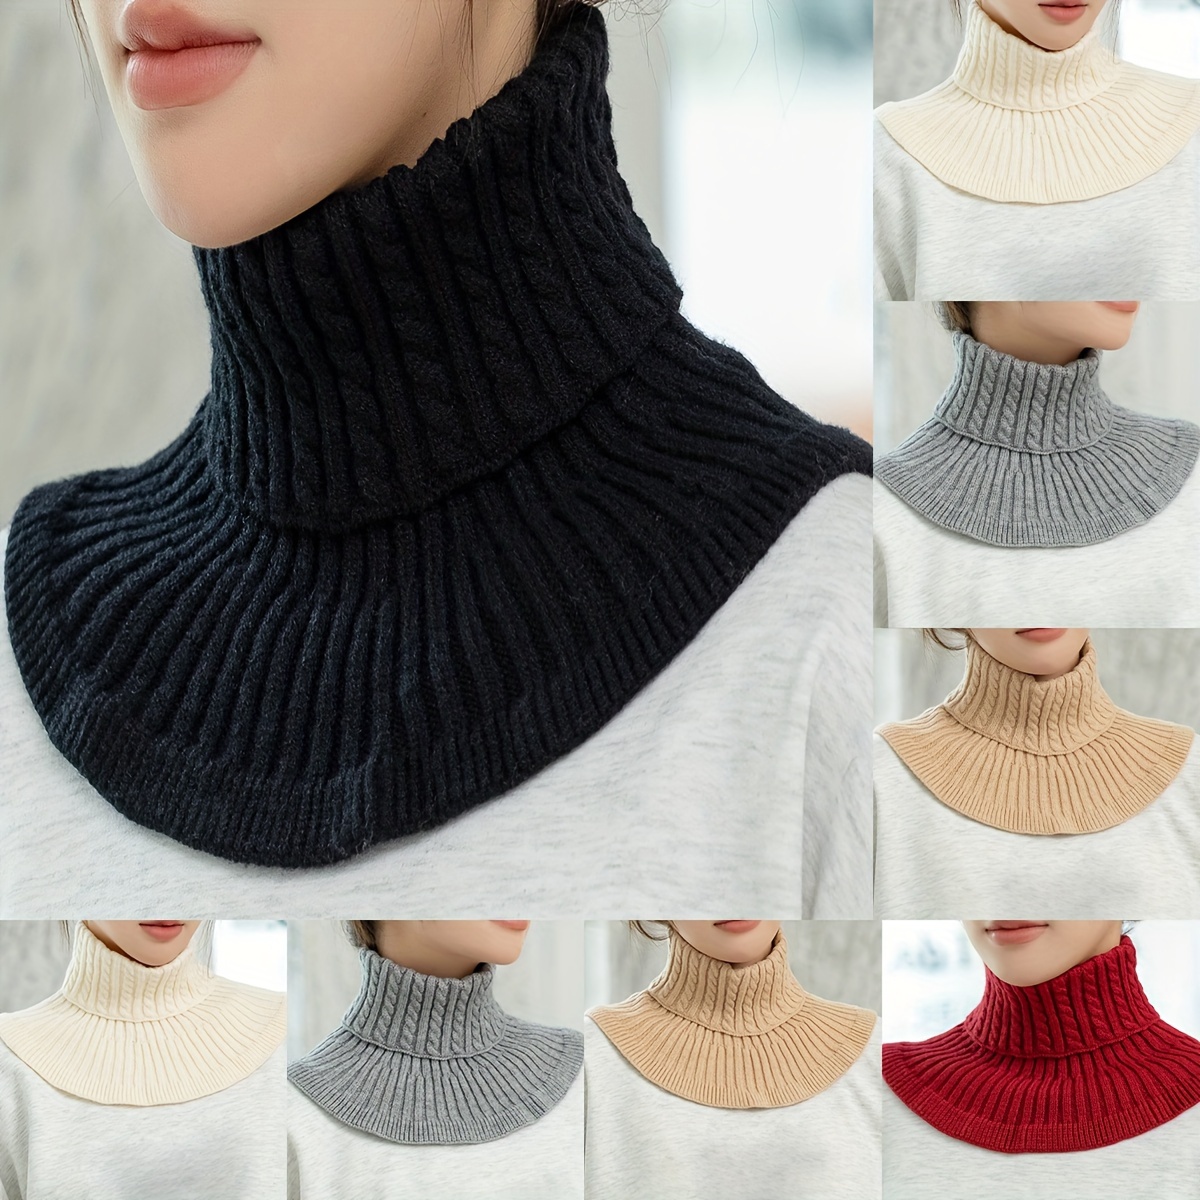 

Elegant Twist Knit Fake Collar Neck Gaiter Simple Solid Color Turtleneck Neck Cover Autumn Winter Coldproof Warm Infinity Scarf